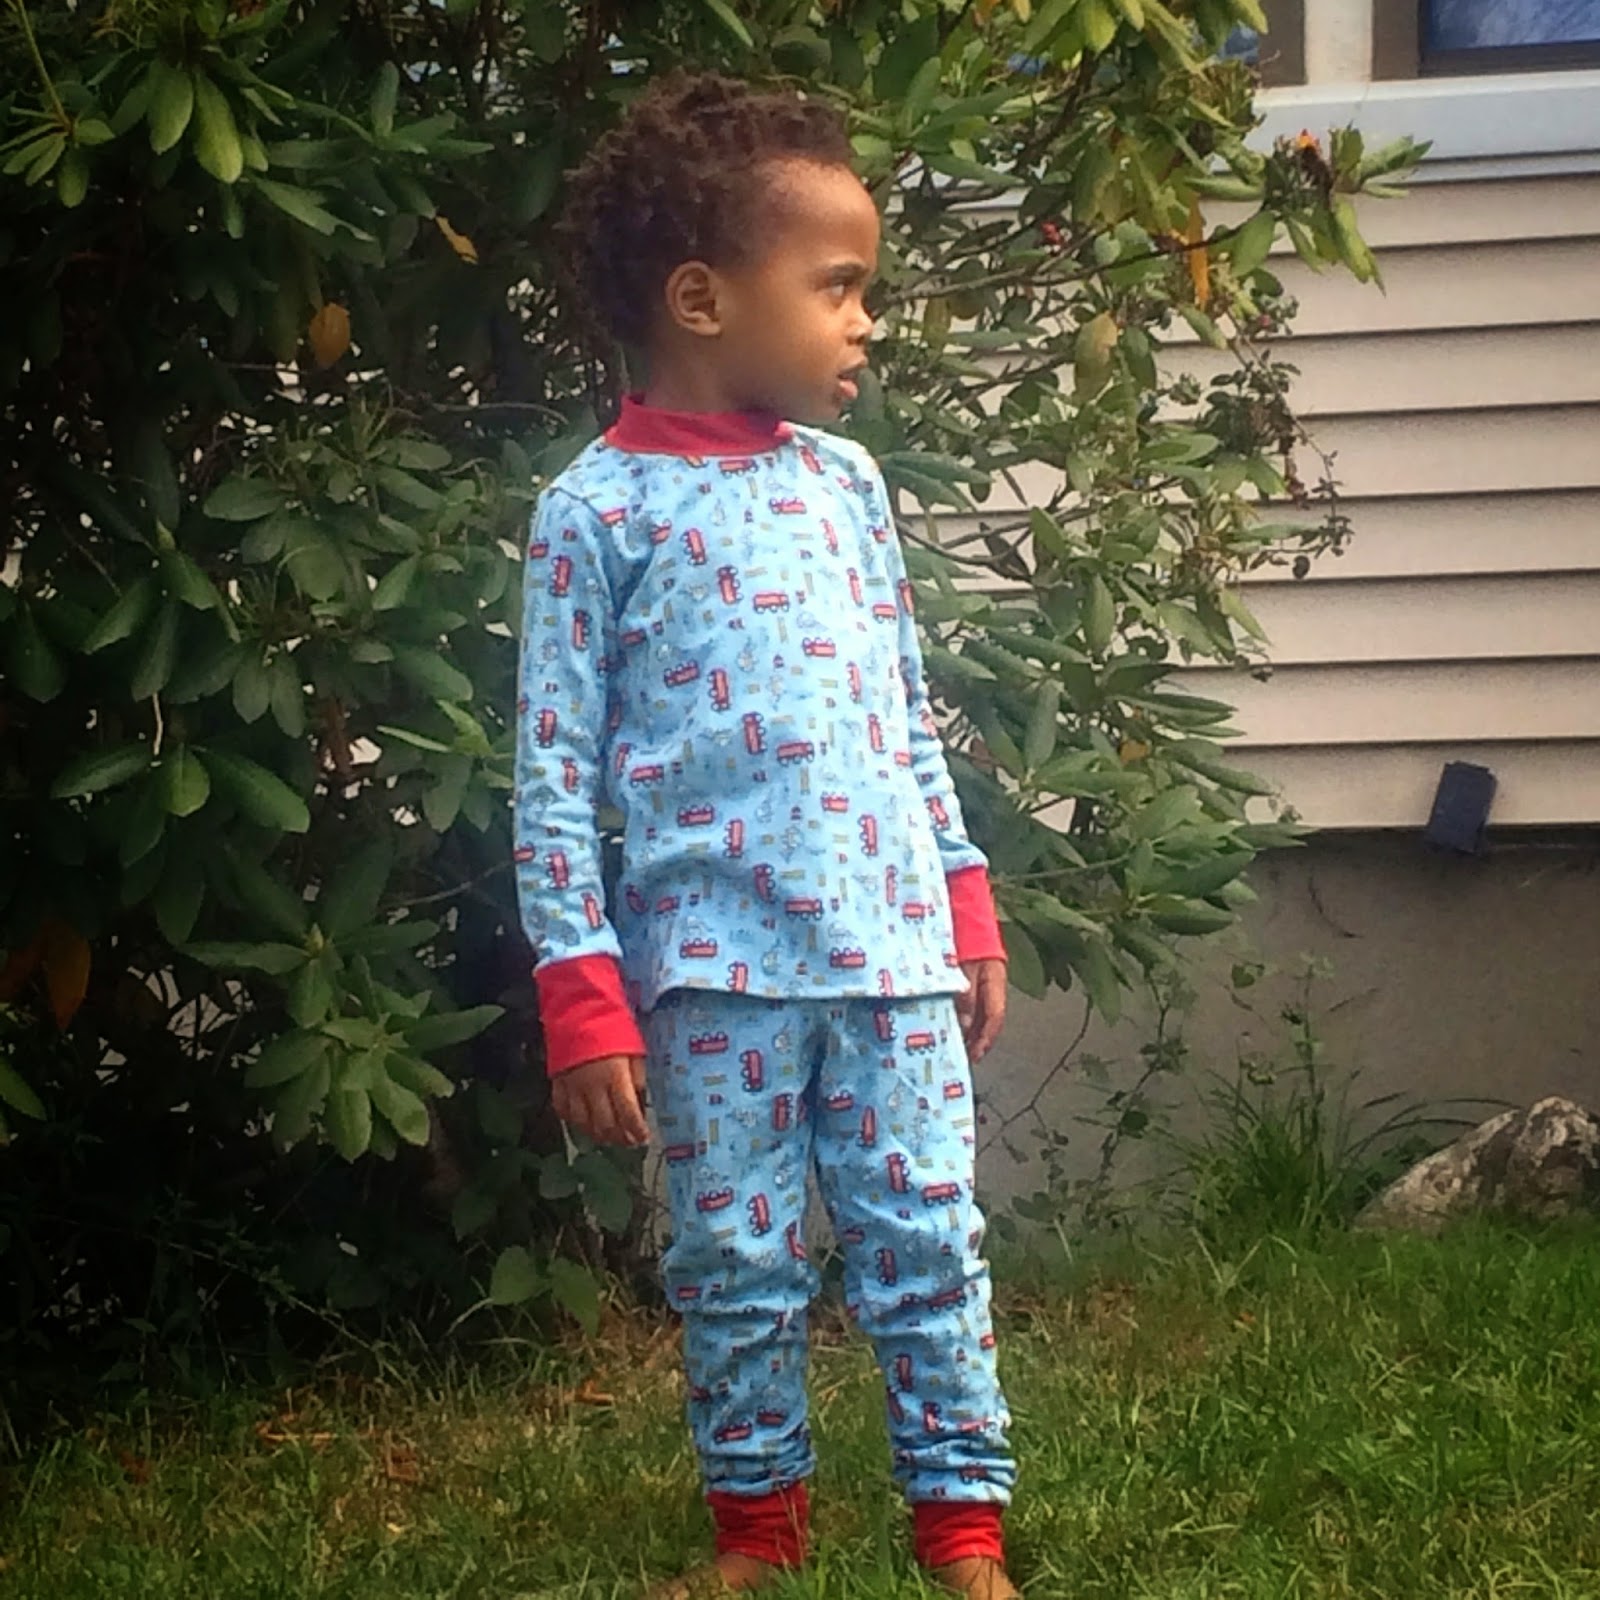 http://twoposhtoddlers.blogspot.ca/2014/09/all-you-need-jammies-pattern-testing.html?m=1